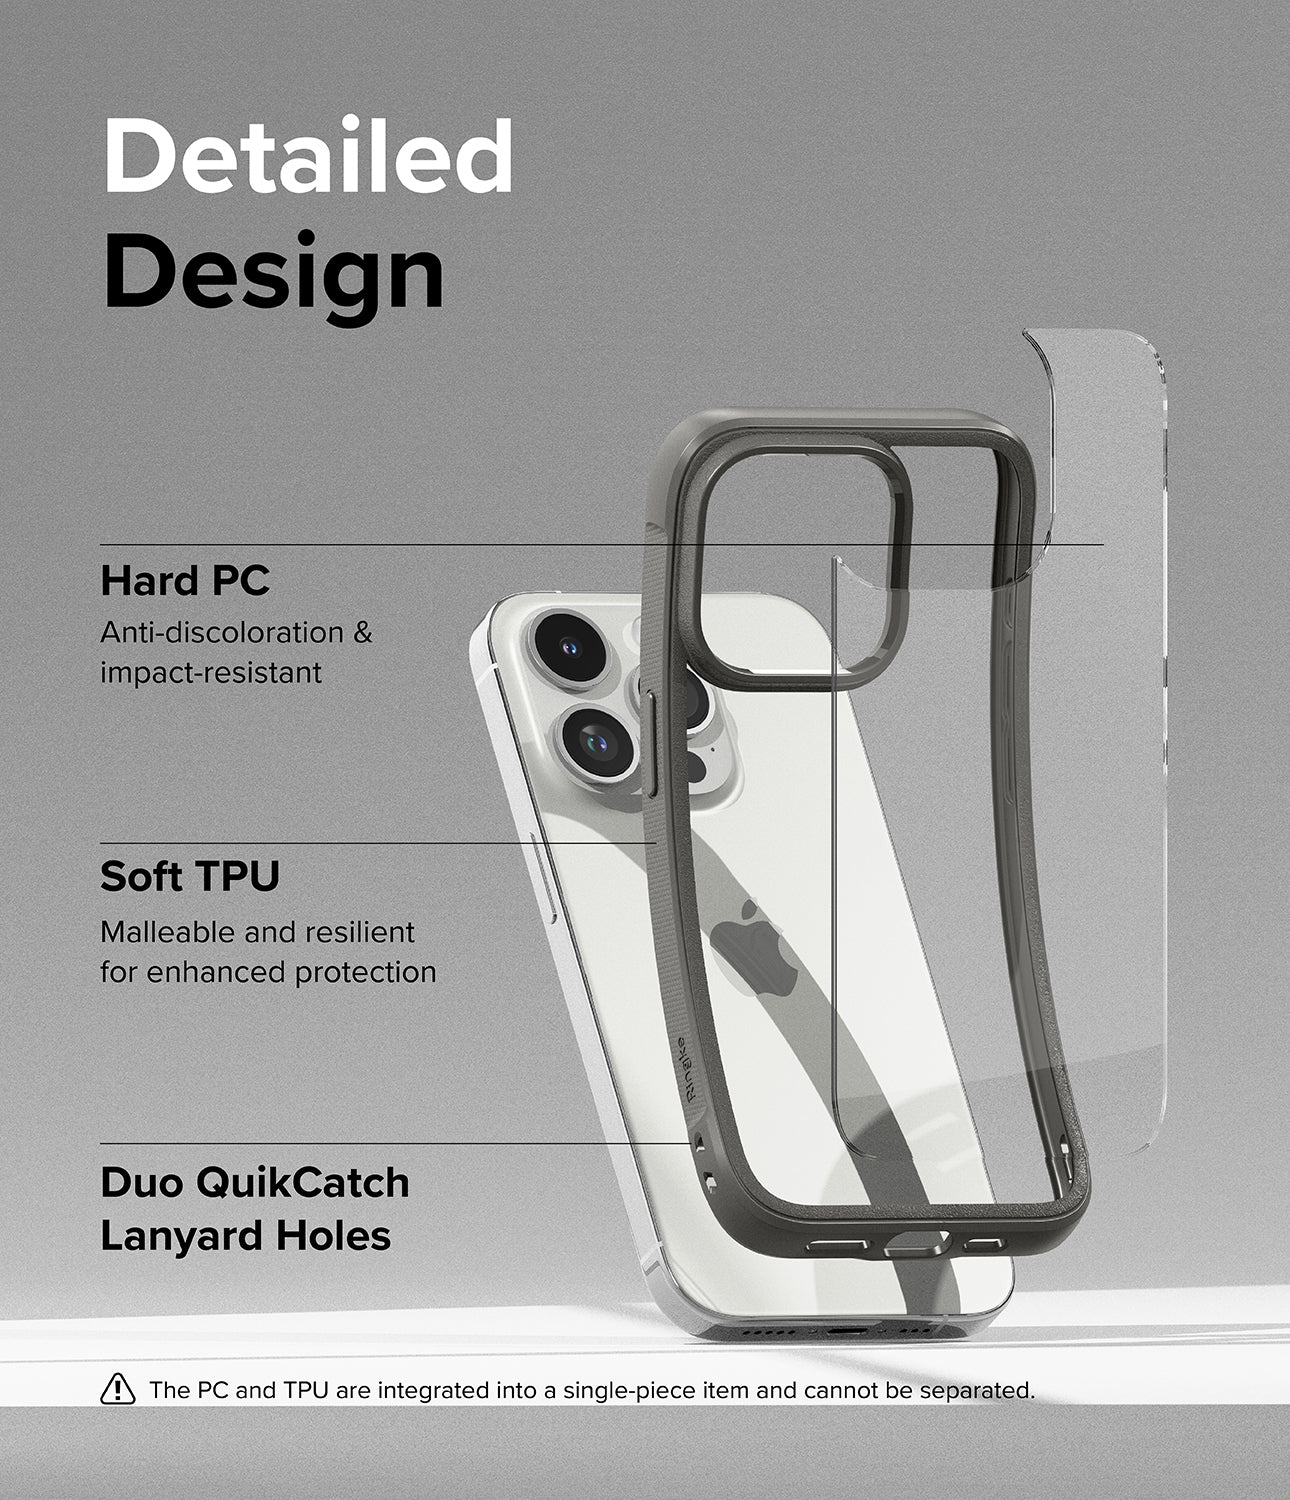 iPhone 15 Pro Max Case | Fusion Bold Gray - Detailed Design. Anti-discoloration and impact-resistant with Hard PC. Malleable and resilient for enhanced protection with Soft TPU. Duo QuikCatch Lanyard Holes